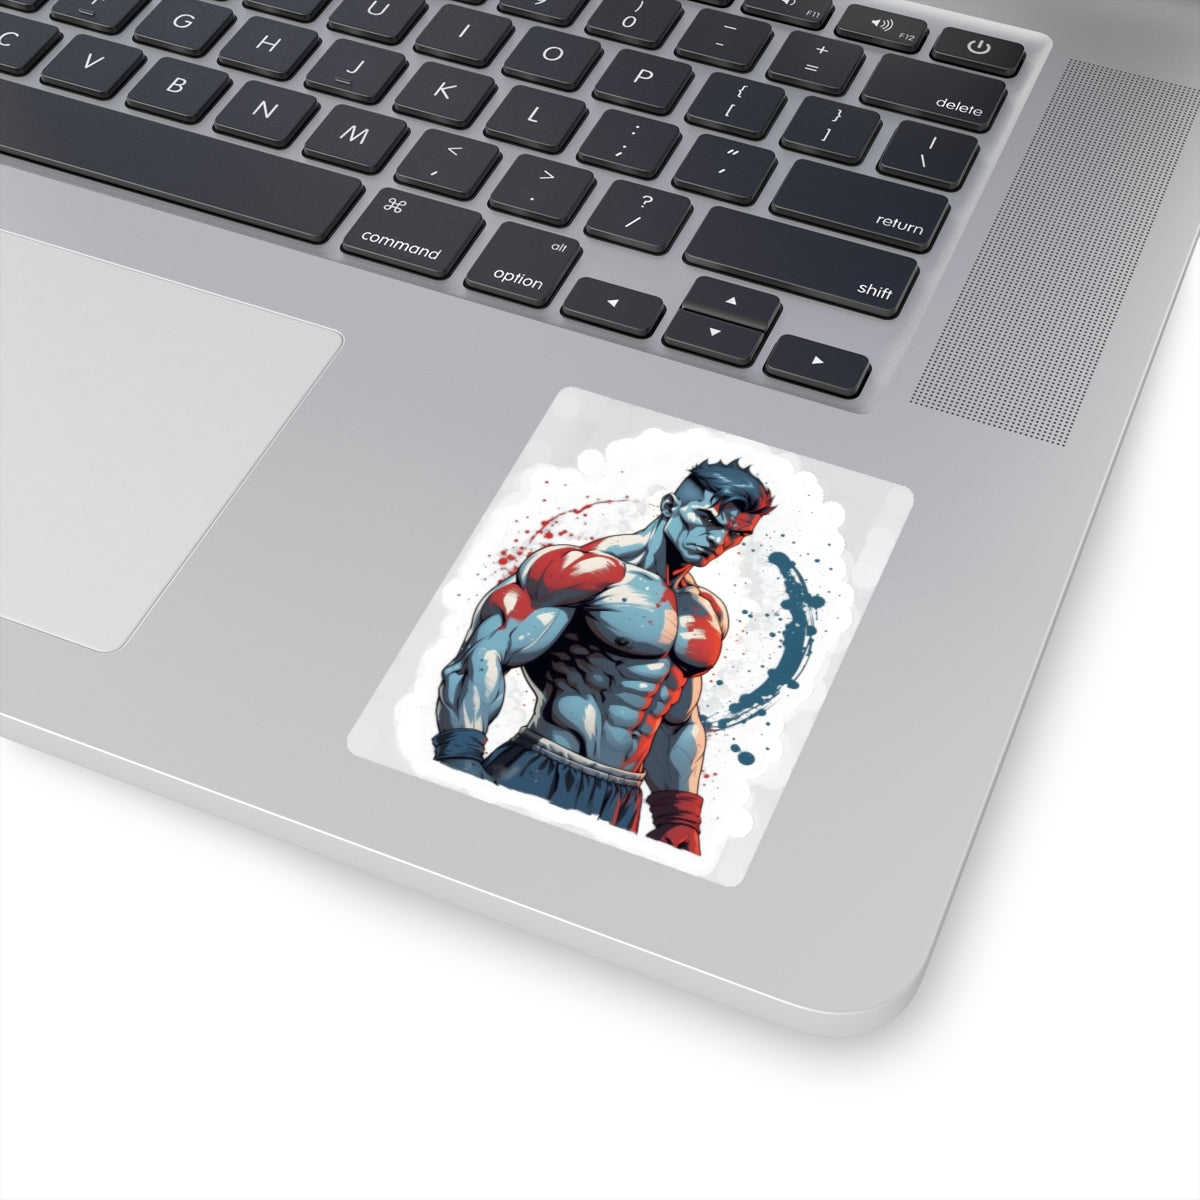 Kǎtōng Piàn - Prized Fighter Collection - America - 003 - Stickers